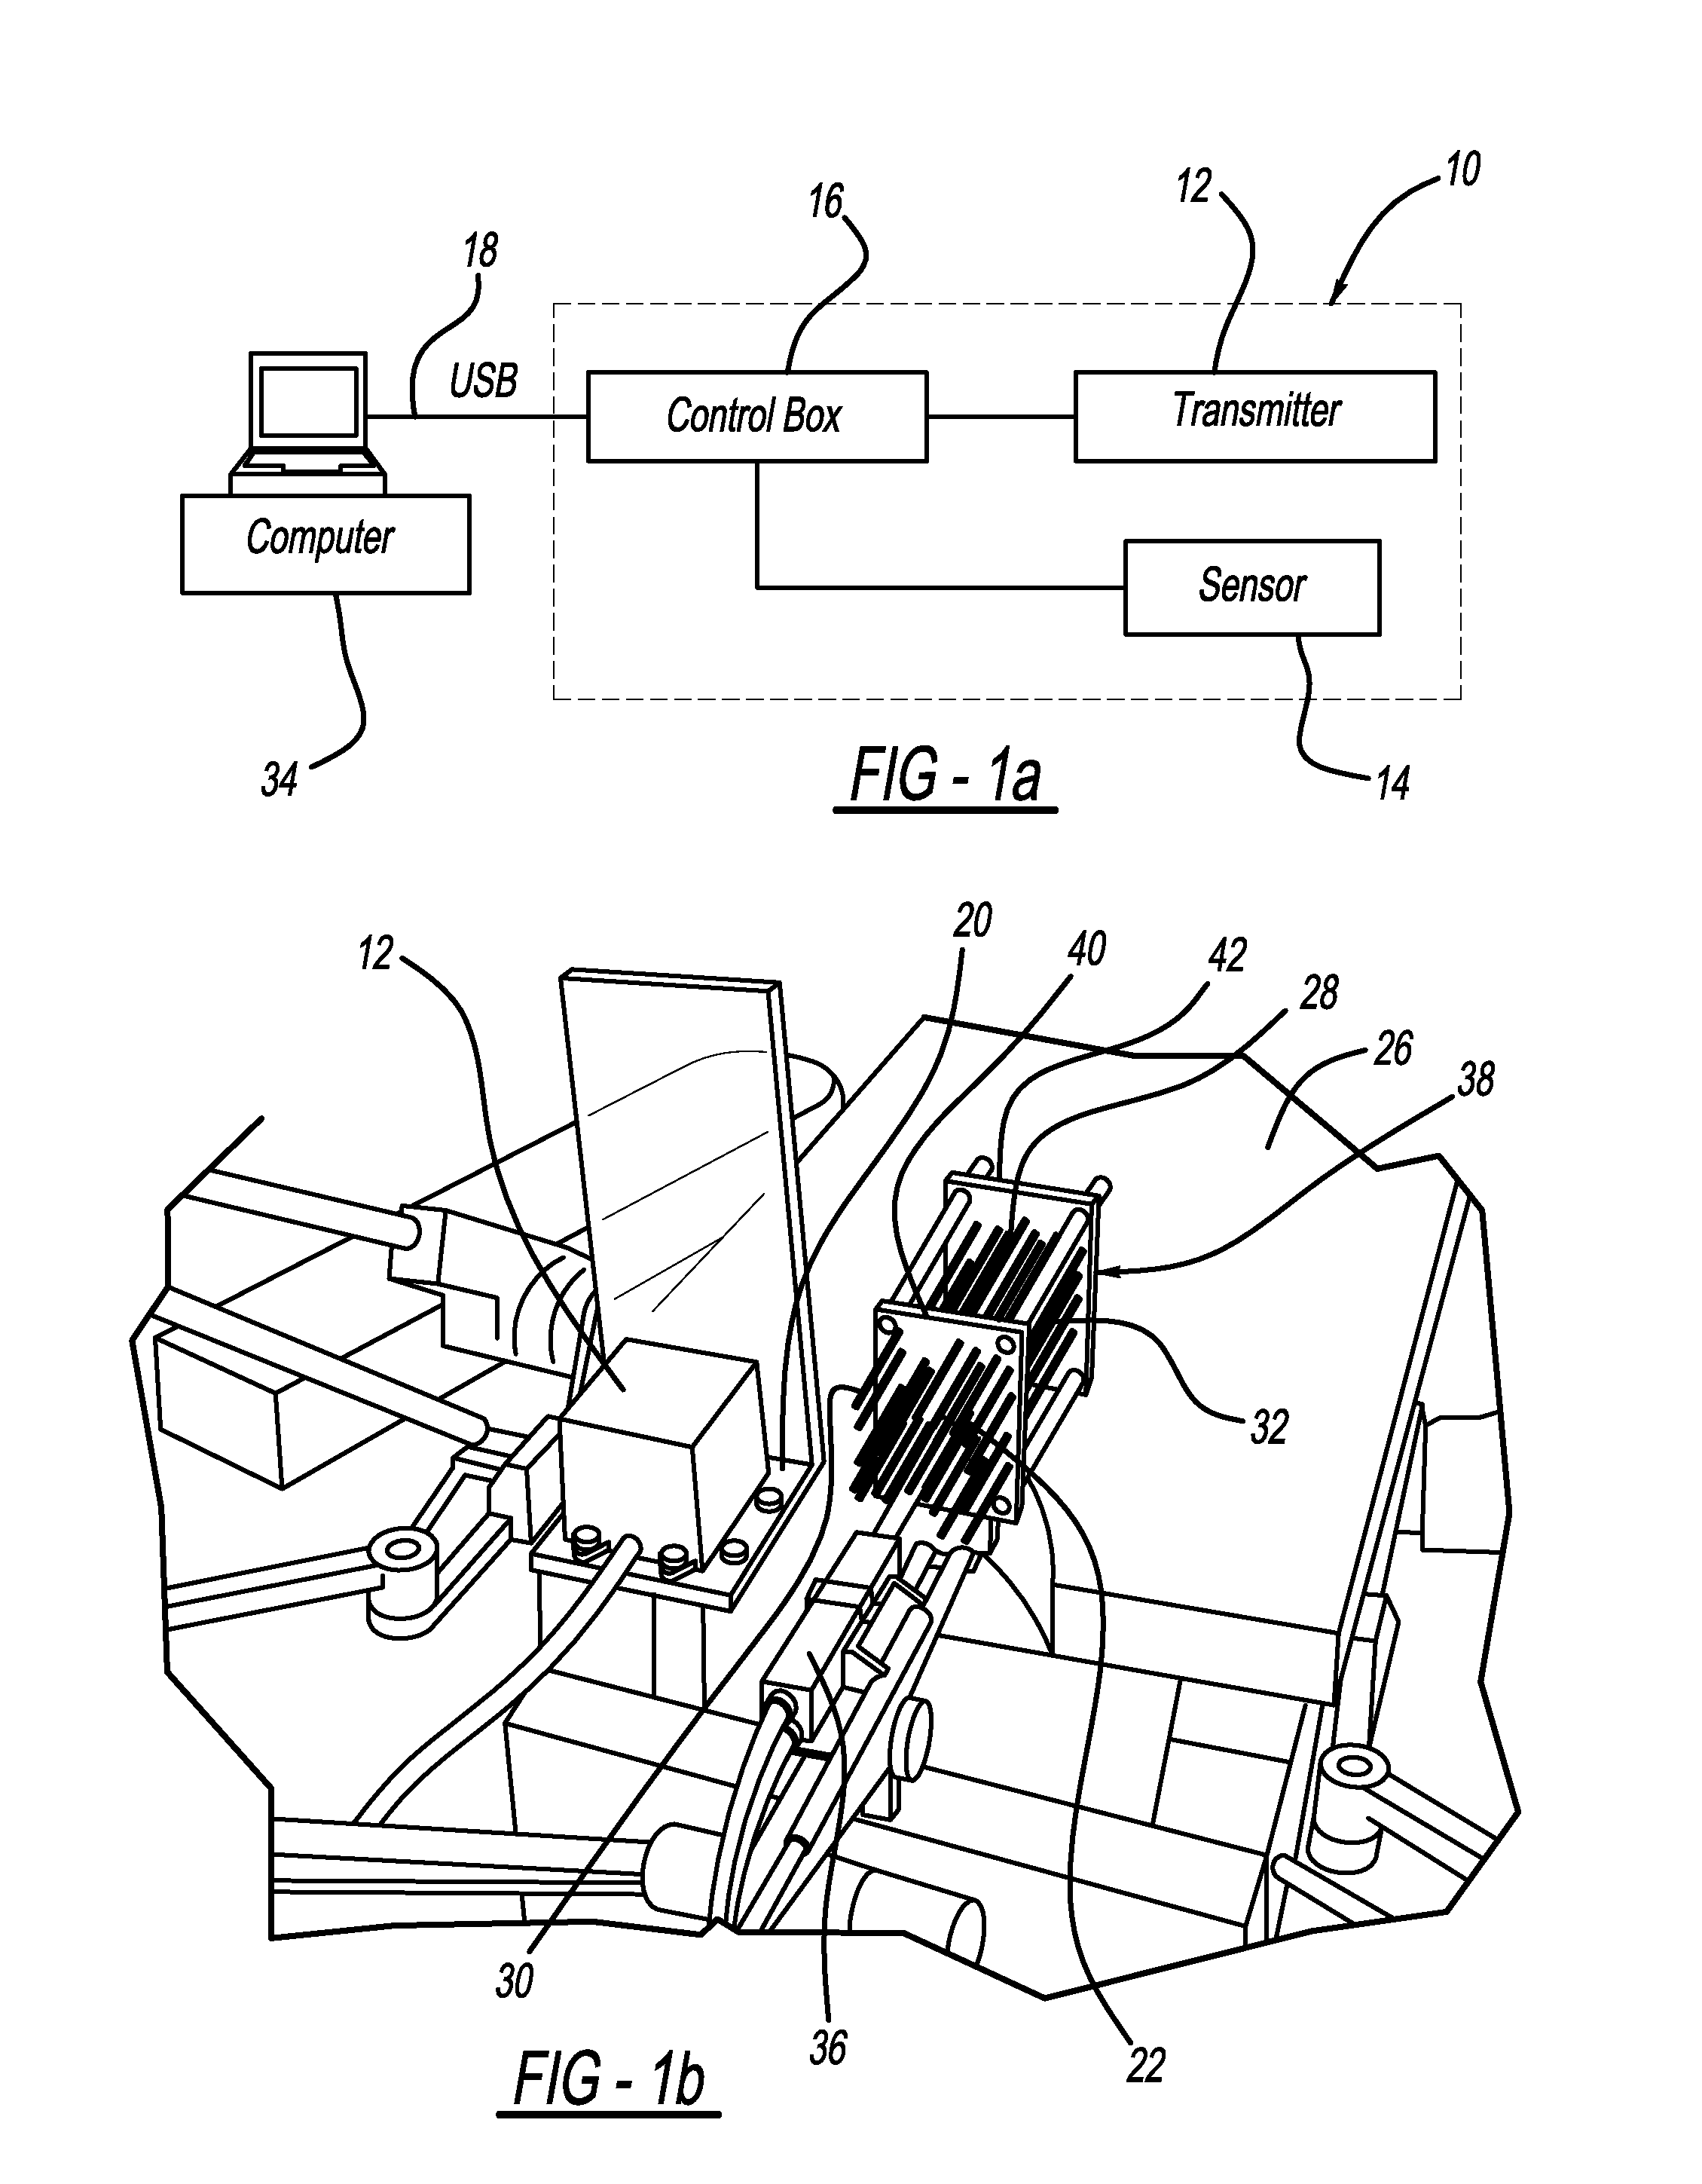 Catheter Placement Detection System and Method for Surgical Procedures